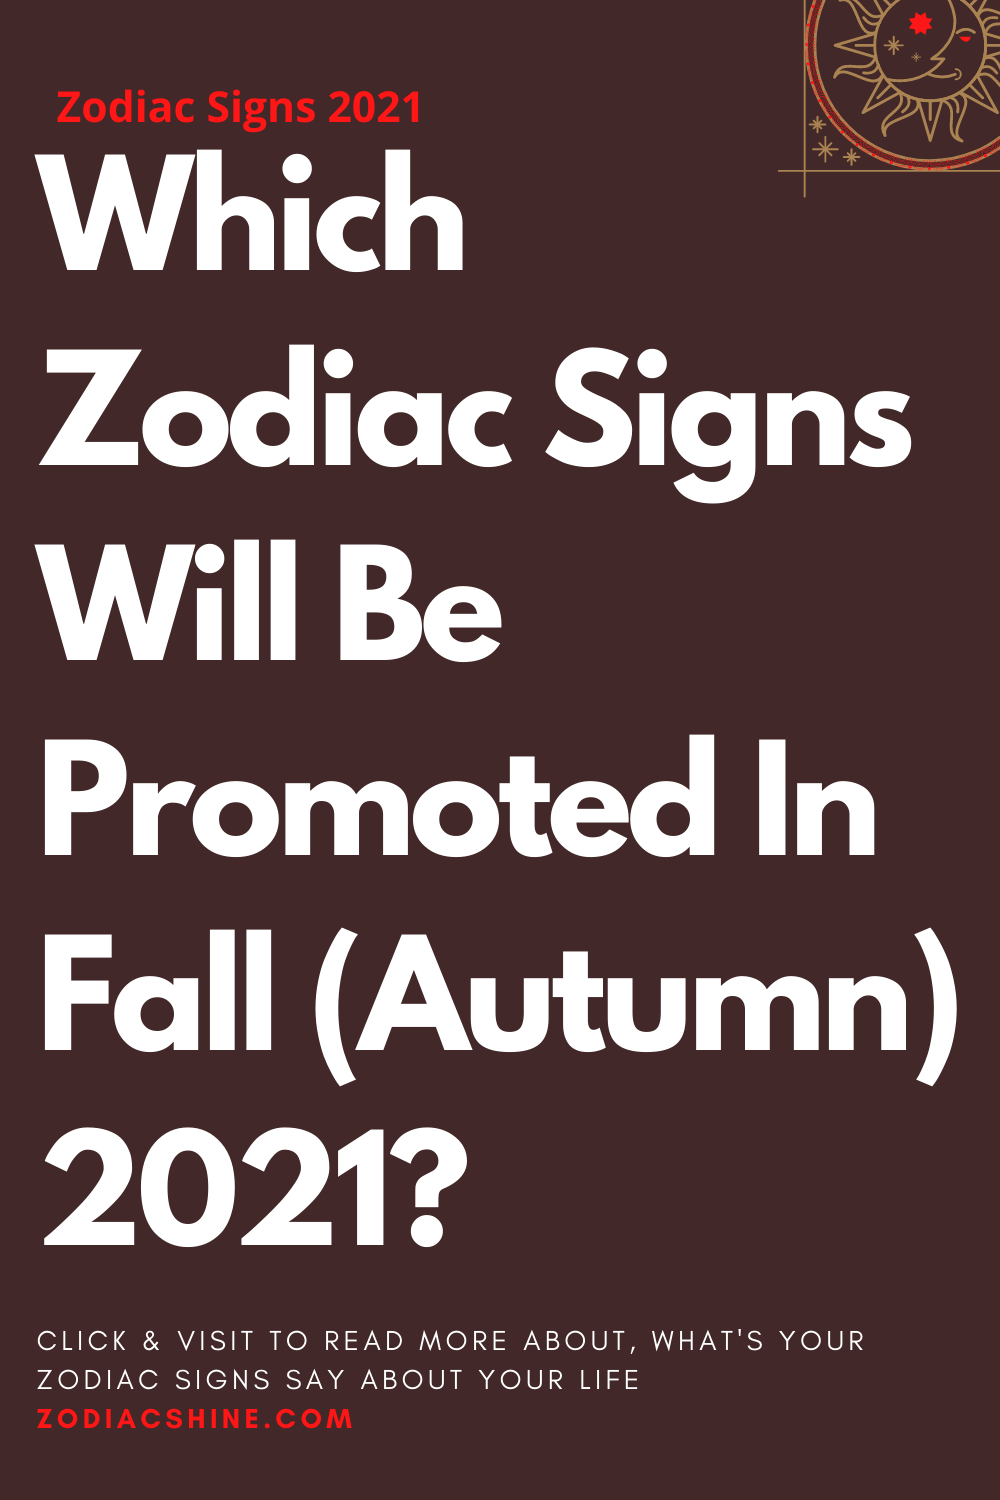 Which Zodiac Signs Will Be Promoted In Fall (Autumn) 2021?